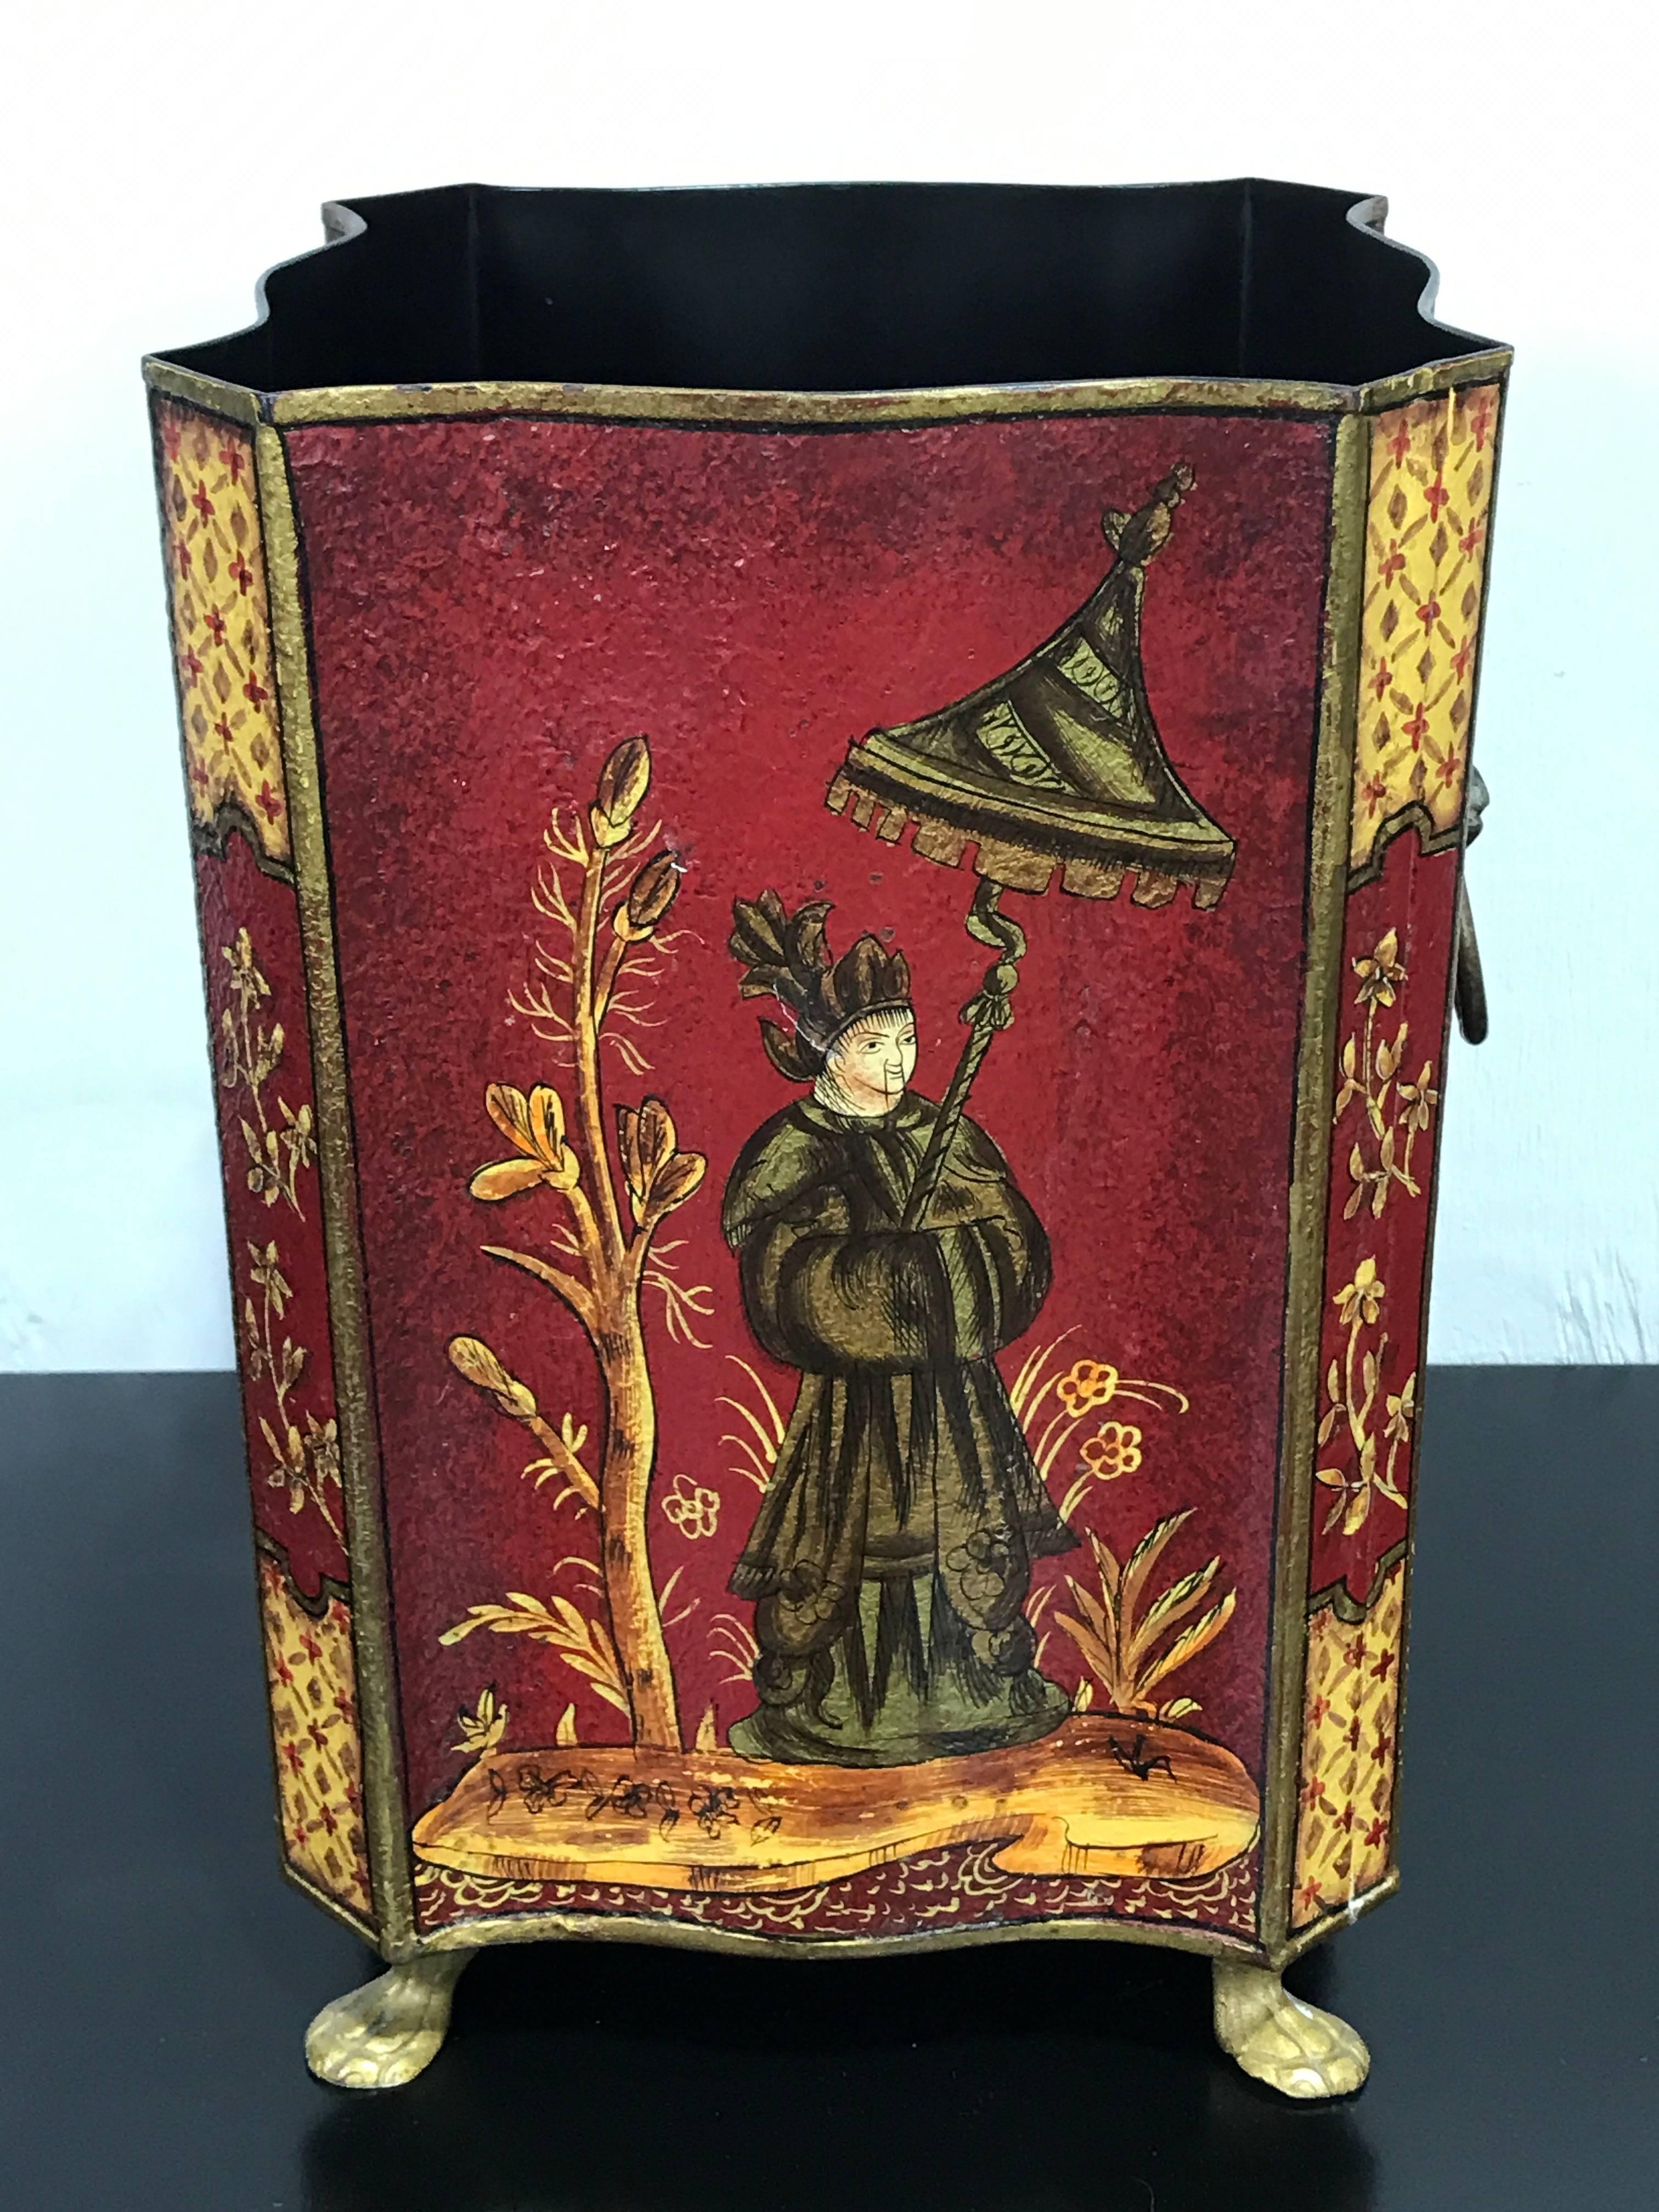 Red tole chinoiserie wastepaper or trash can, with fine gilt decoration with ring handles and paw feet. The interior measures 7 x 7 x 10.5